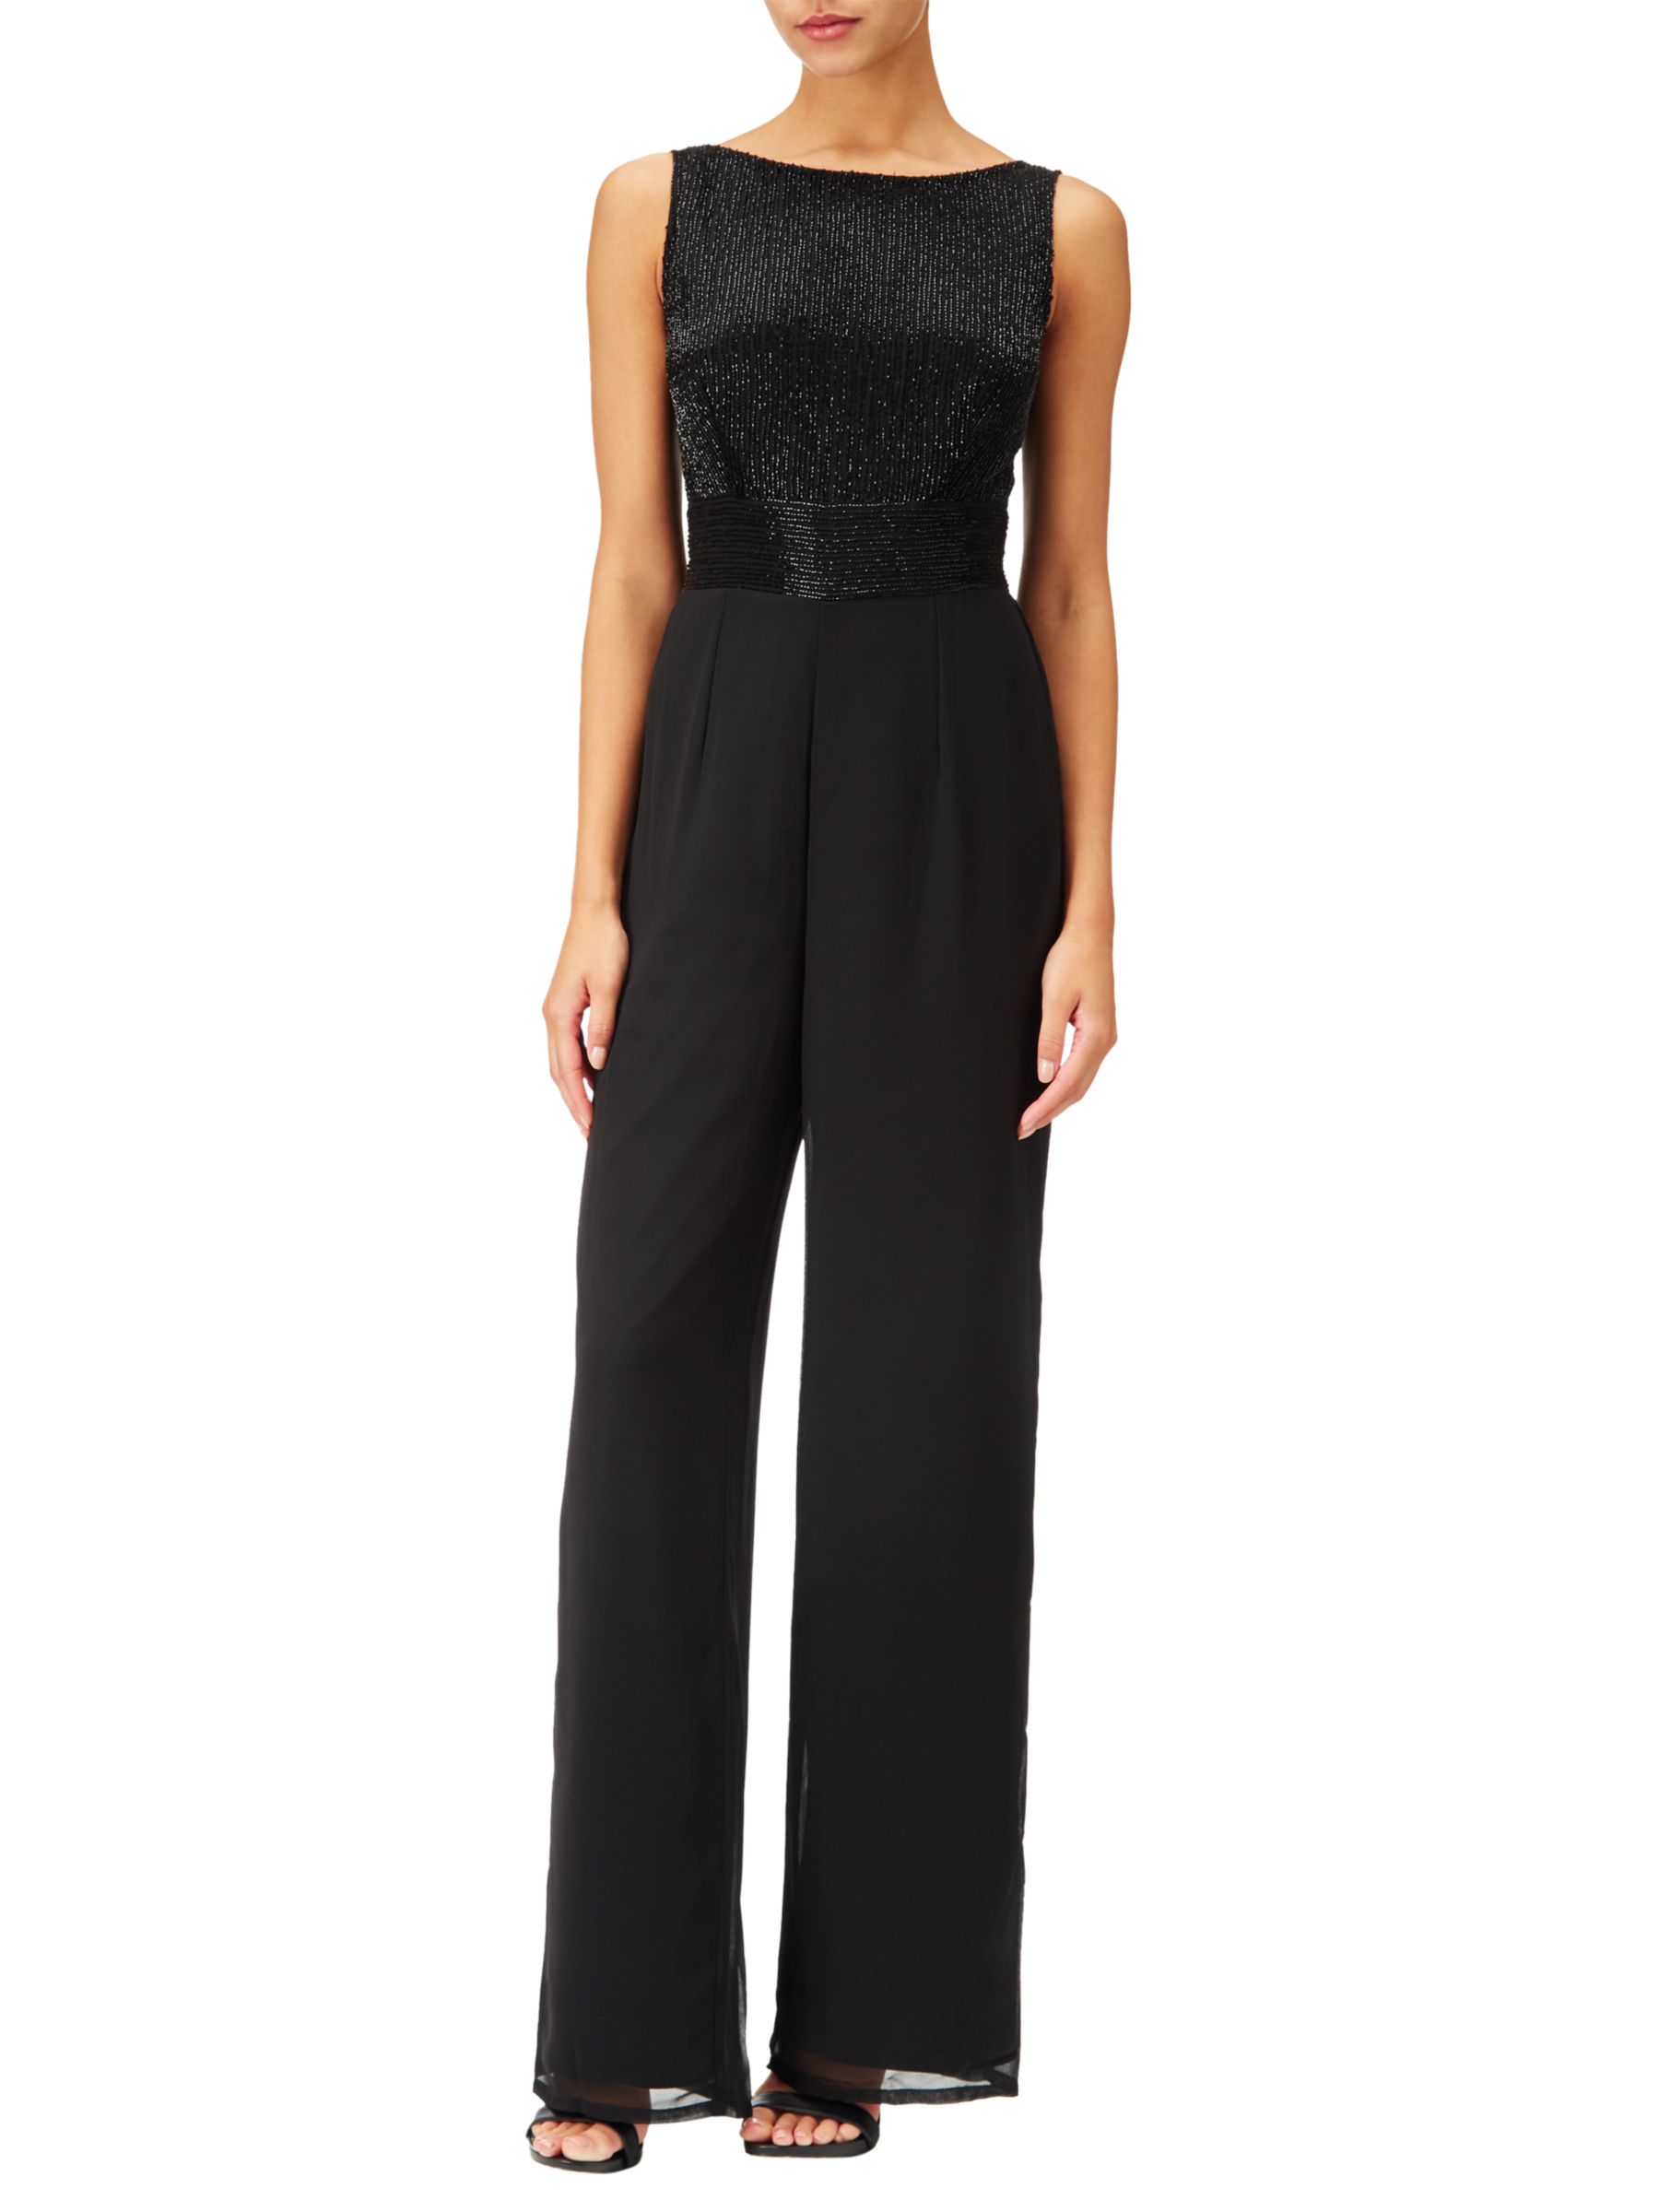 Adrianna Papell Long Beaded Bodice Jumpsuit, Black